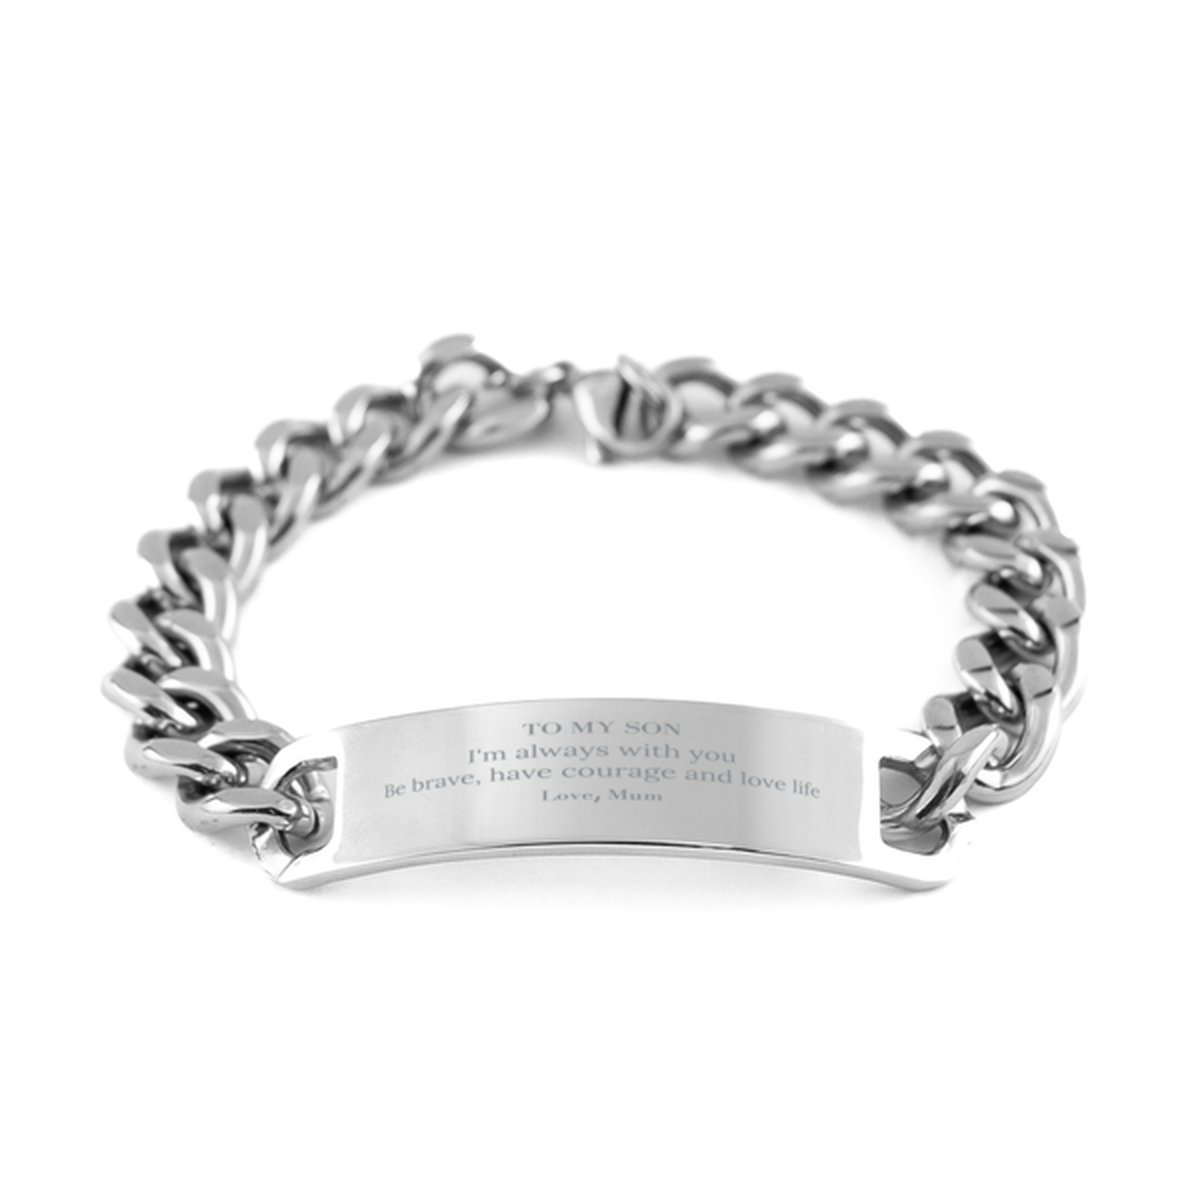 To My Son Gifts from Mum, Unique Cuban Chain Stainless Steel Bracelet Inspirational Christmas Birthday Graduation Gifts for Son I'm always with you. Be brave, have courage and love life. Love, Mum